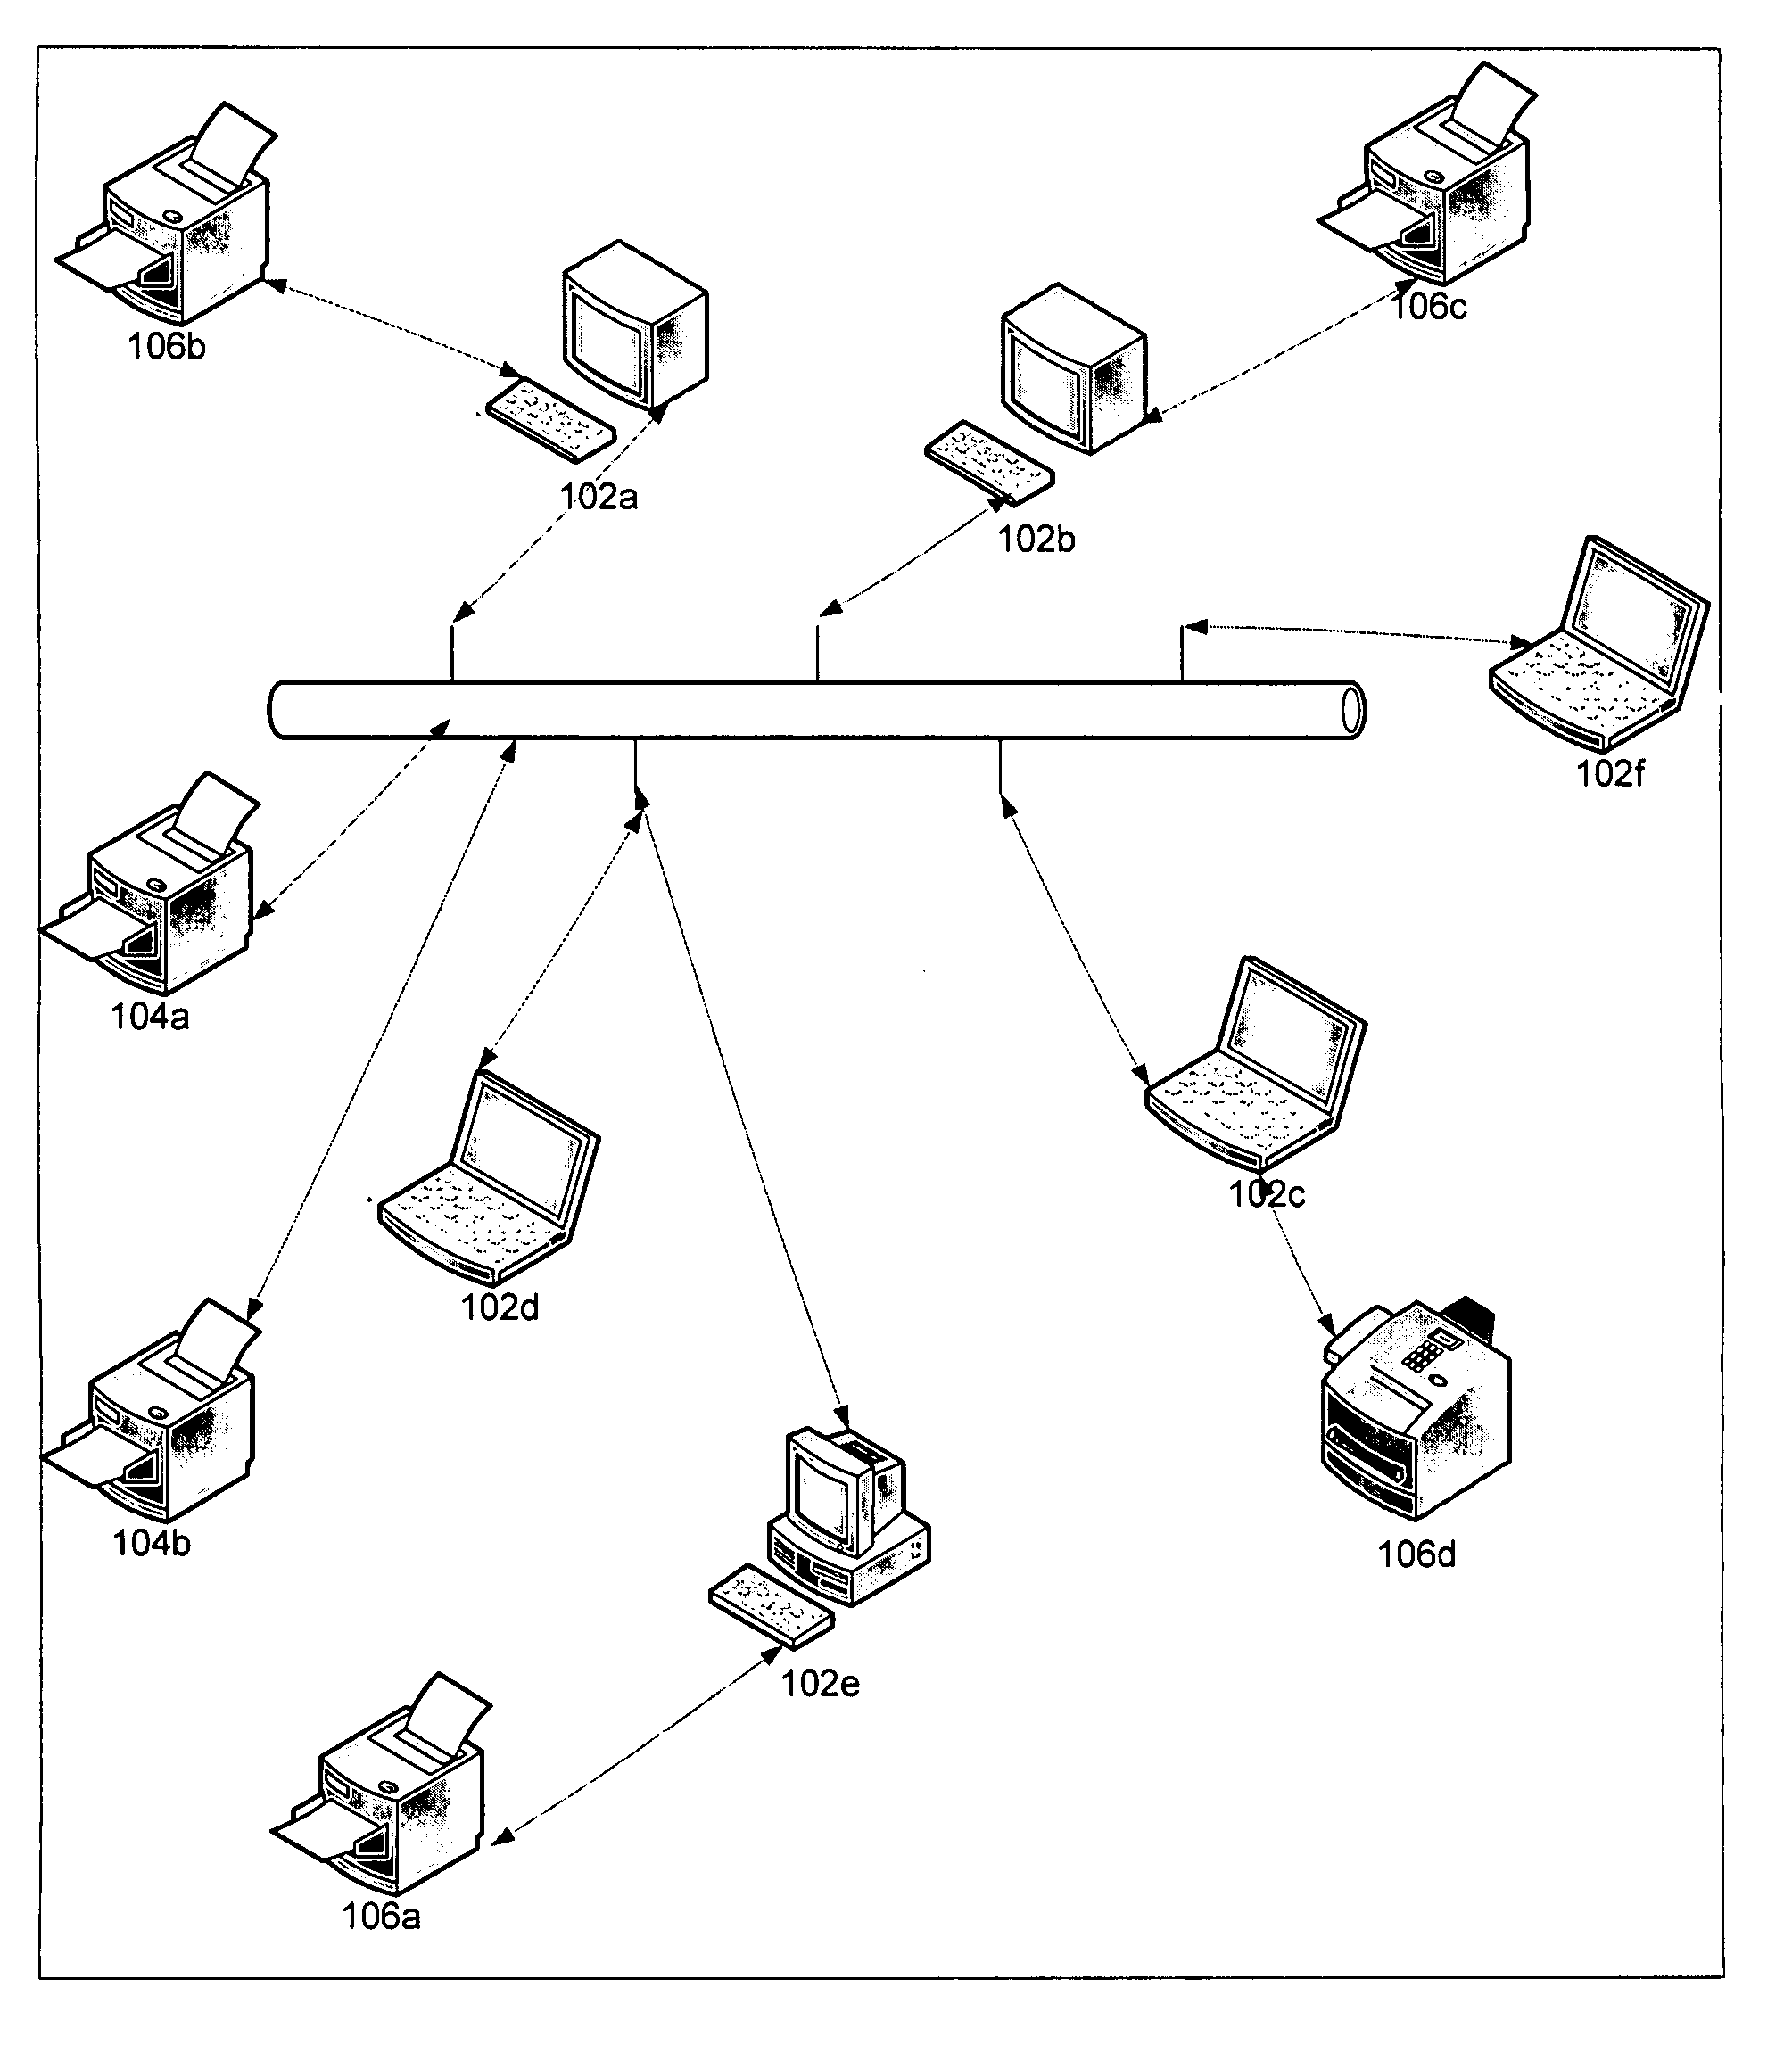 Apparatus and method for discovering printers within an enterprise